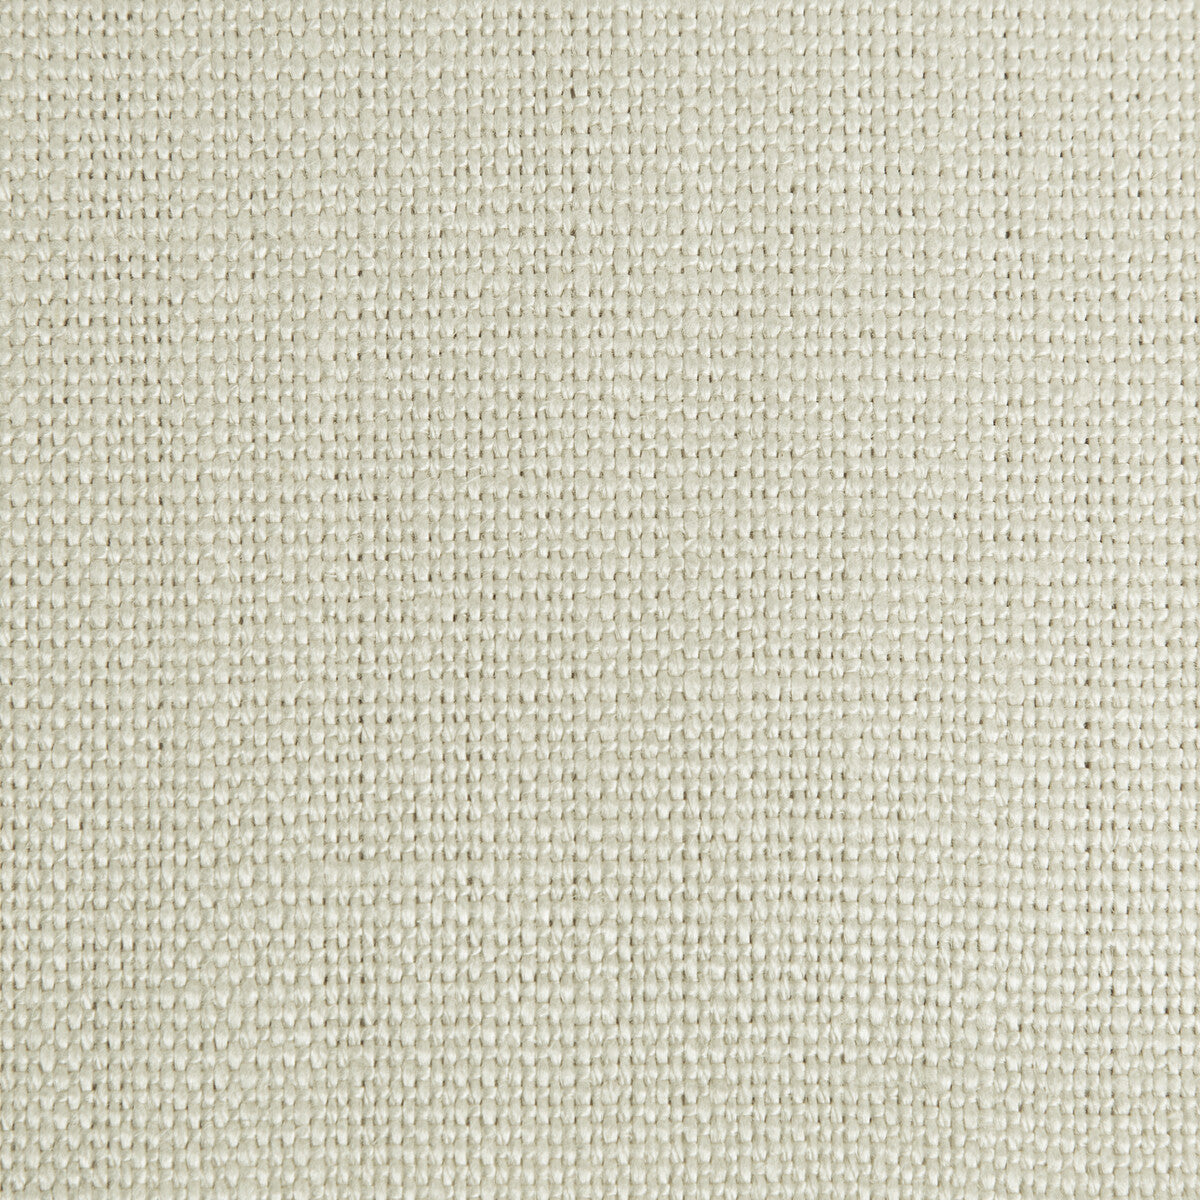 Hampton Linen fabric in mercury gray color - pattern 2012171.1101.0 - by Lee Jofa in the The Complete Linen IV collection